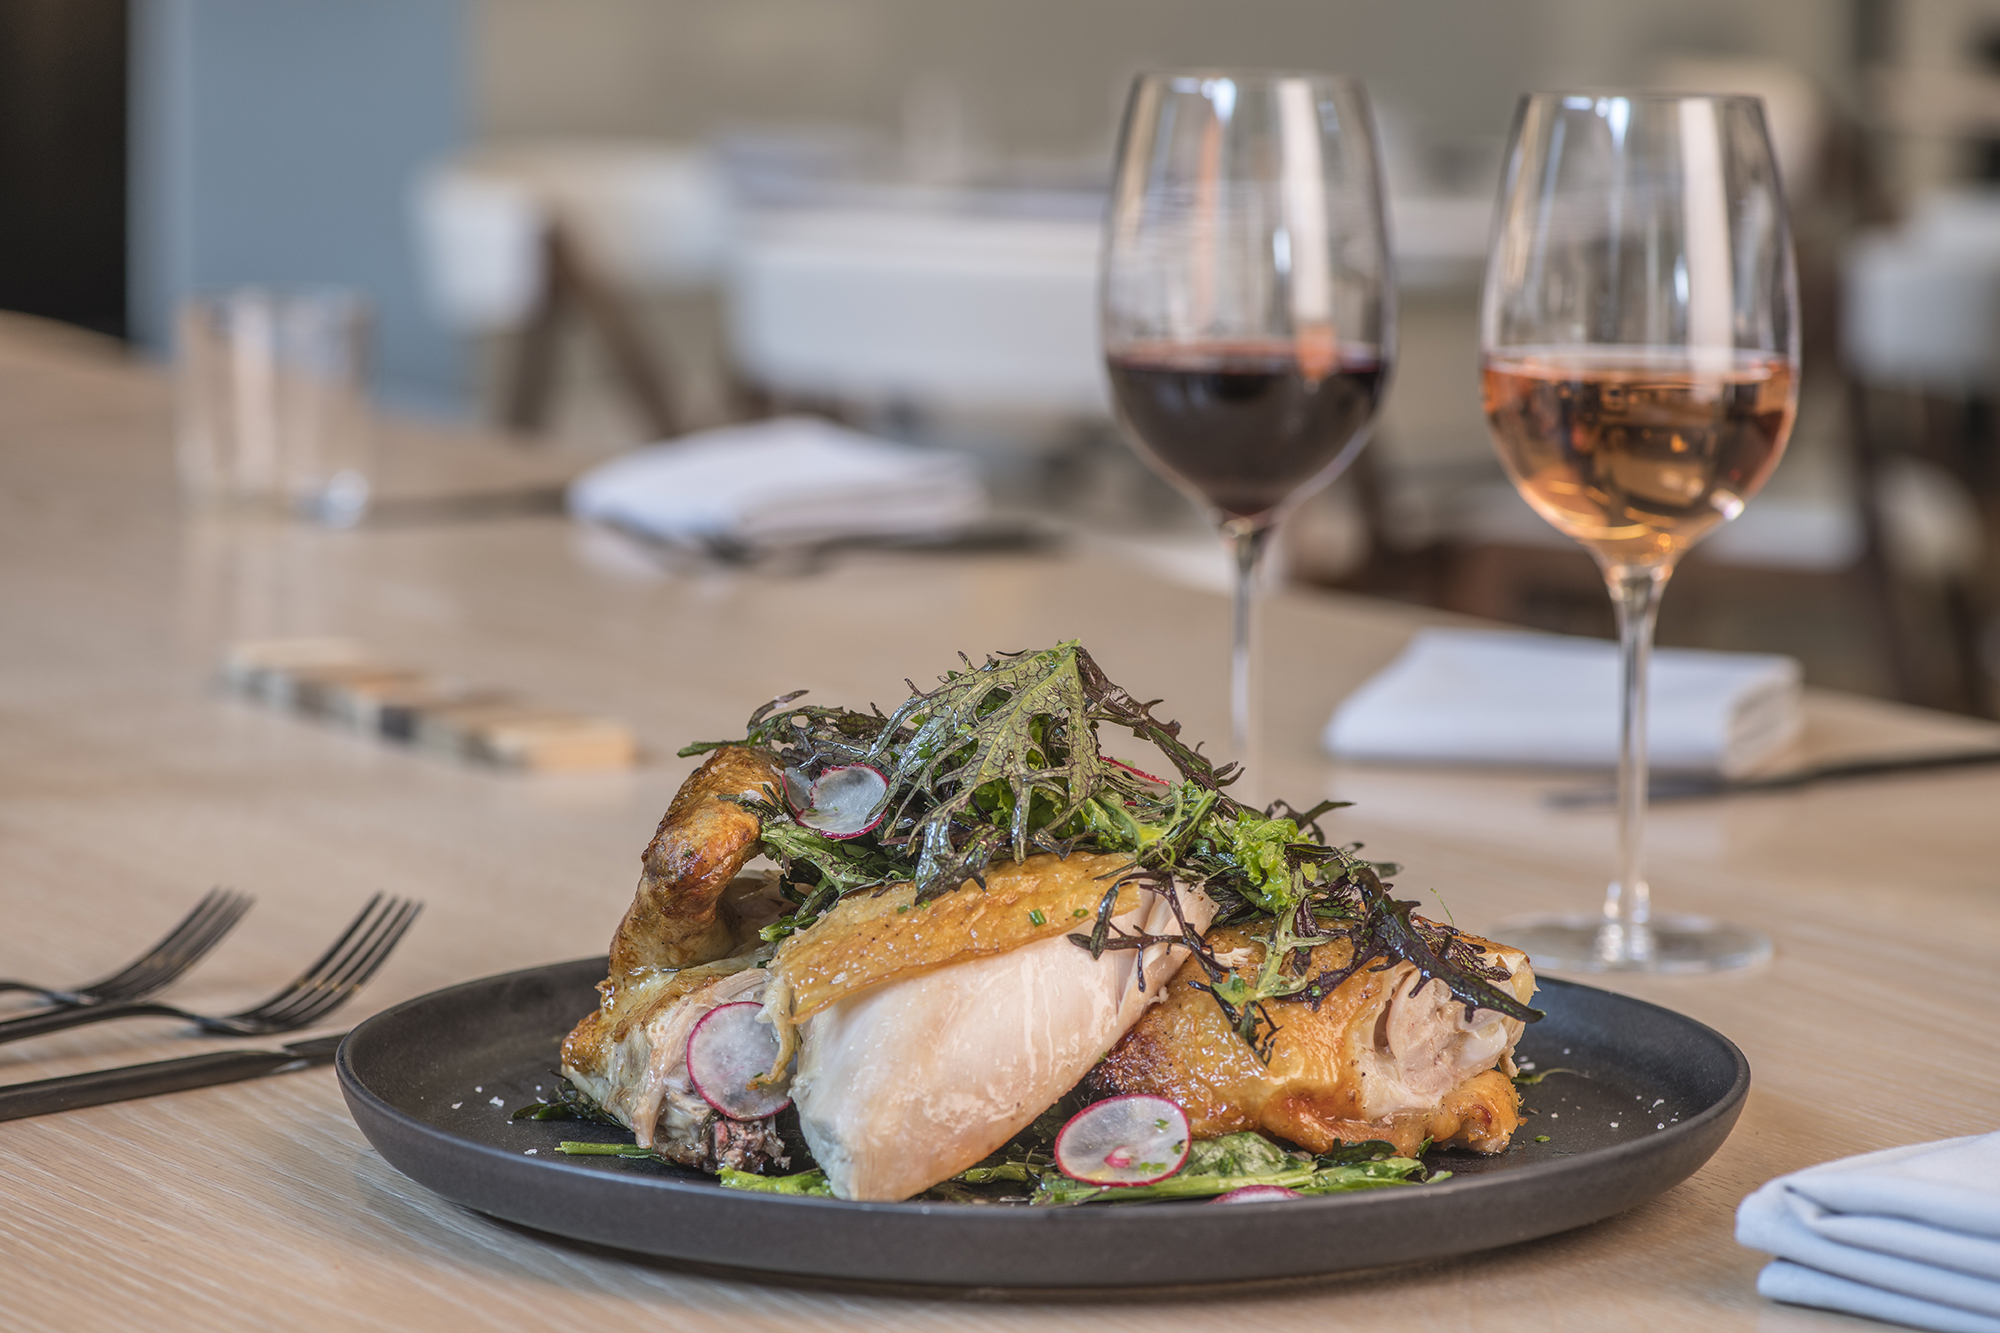  Roasted Gerber farms chicken, mustard greens, radish, chives, sherry vinaigrette at  Fausto at the CAC . || Image:  Twin Spire Photography - Published: 10.2.2019 